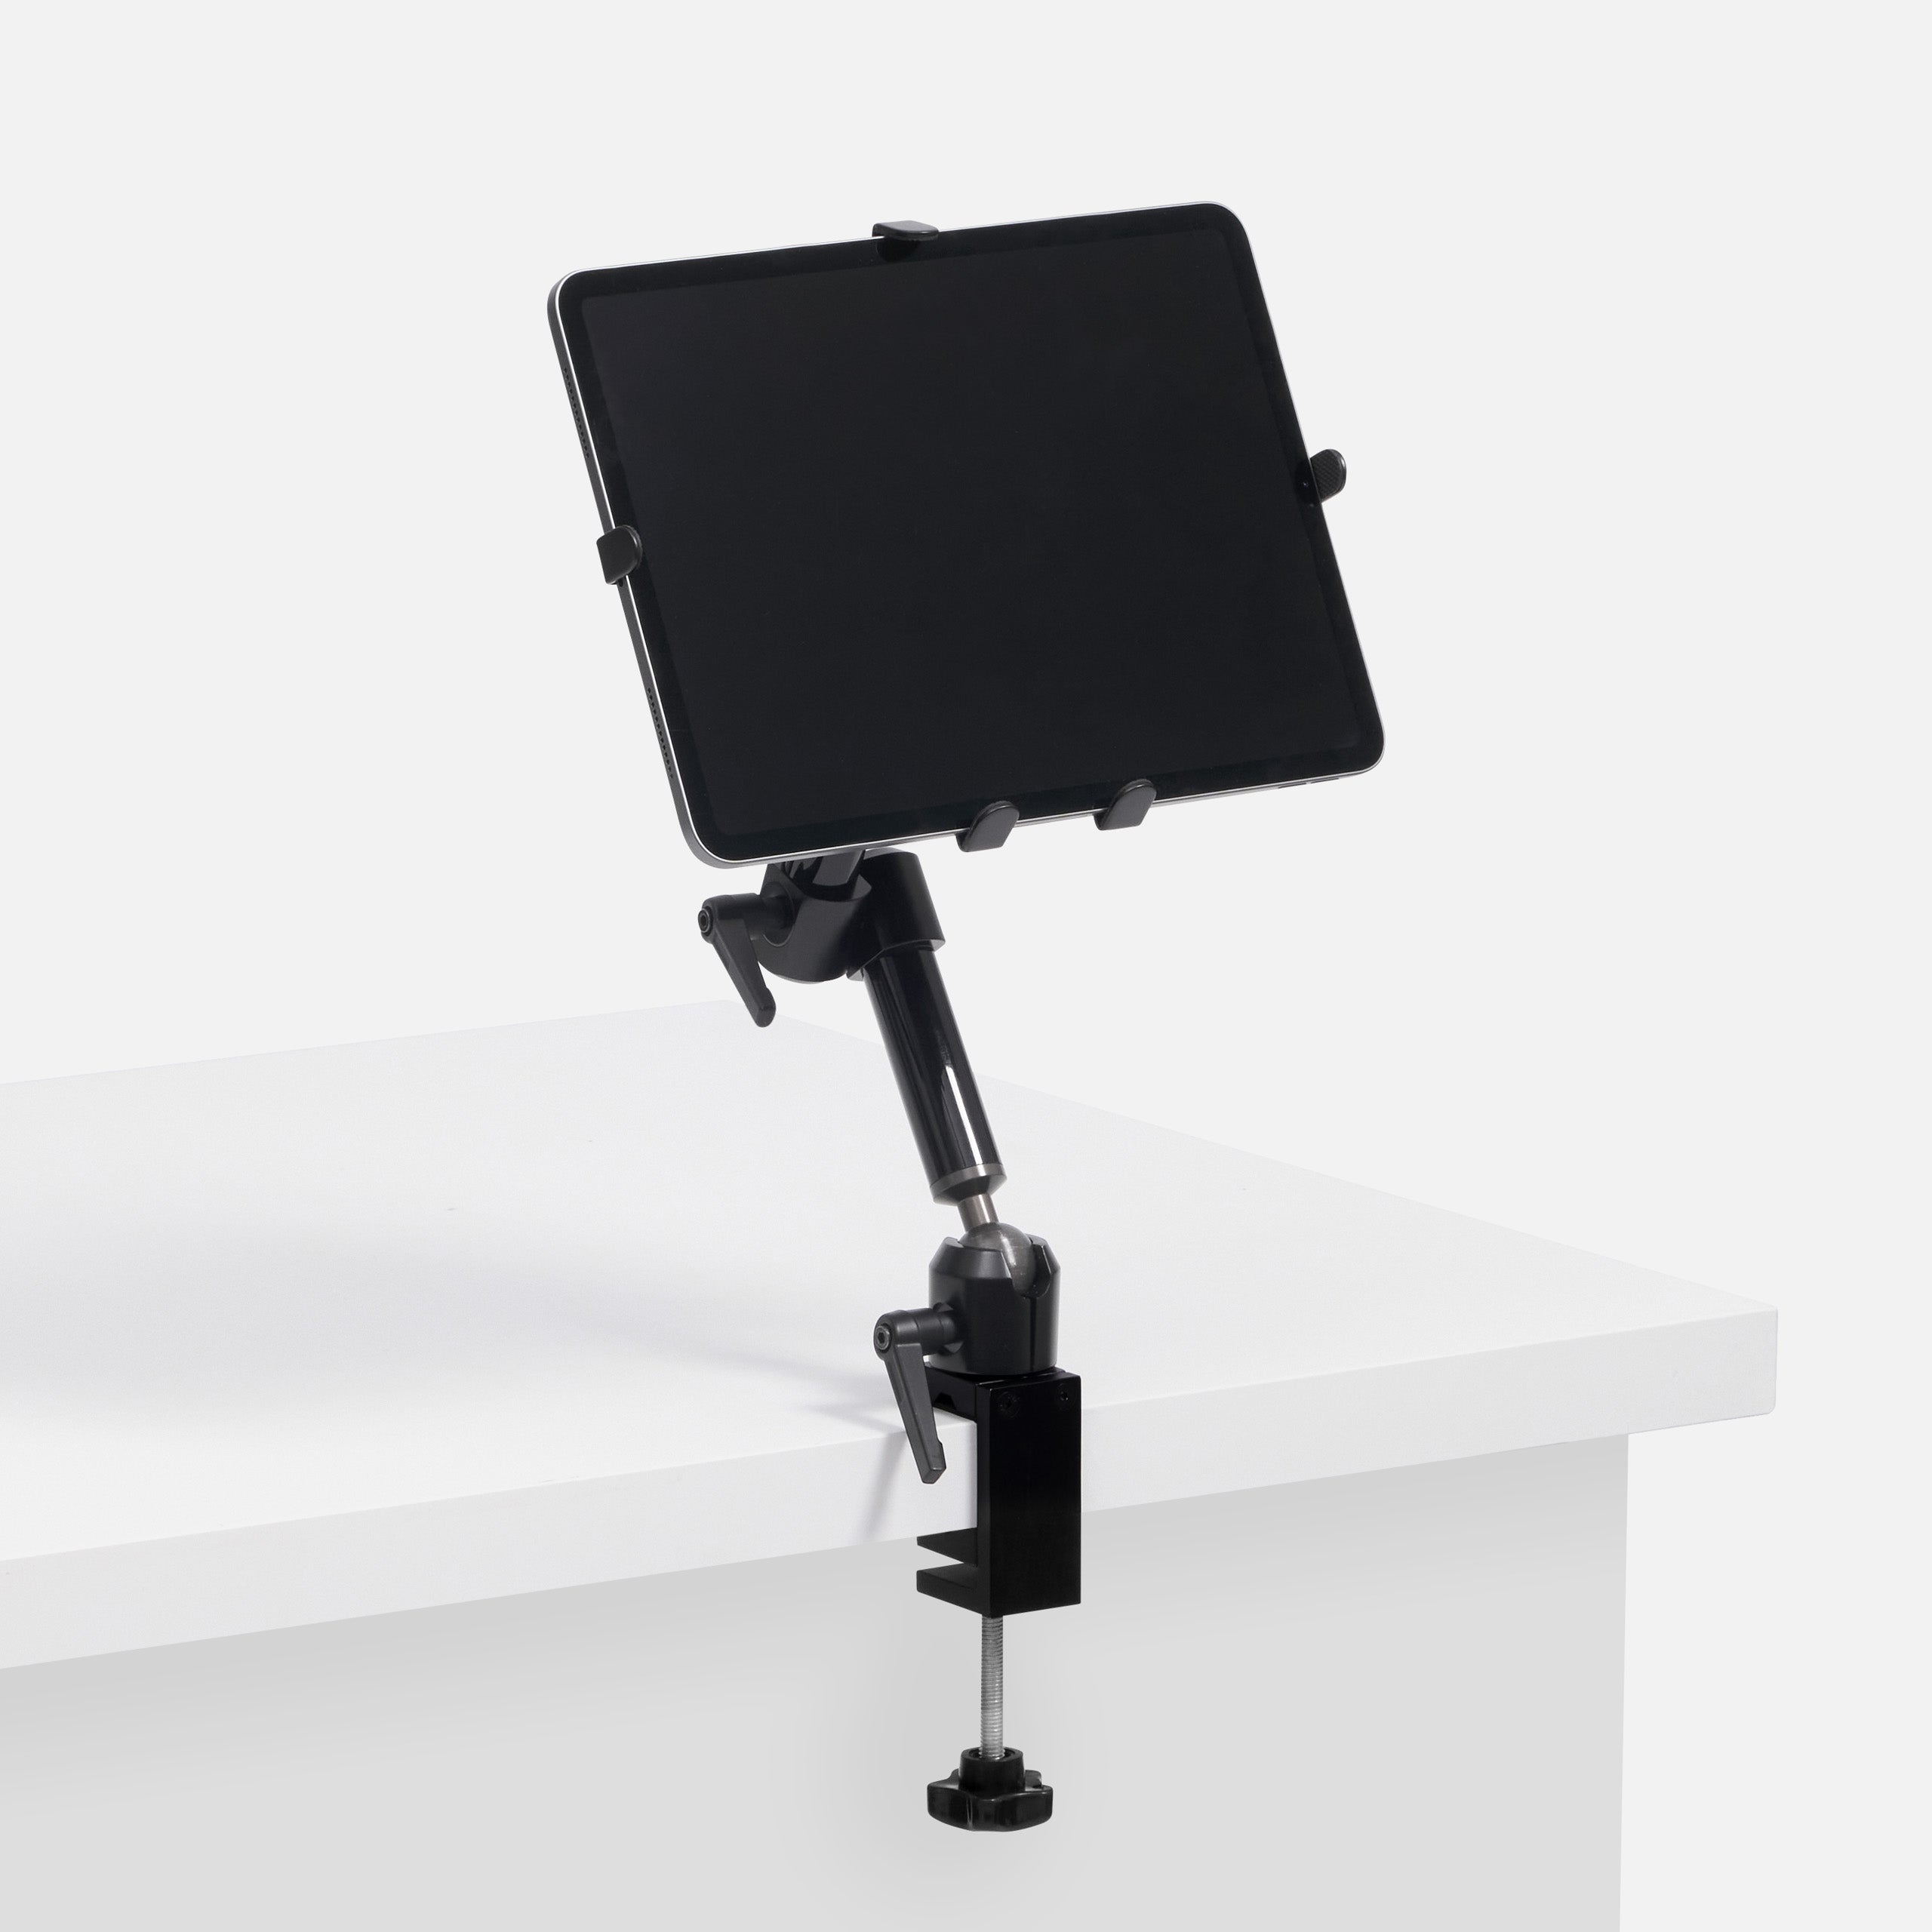 Tablet and iPad Clamp Mount | Grip-CD140 | Utility Line By